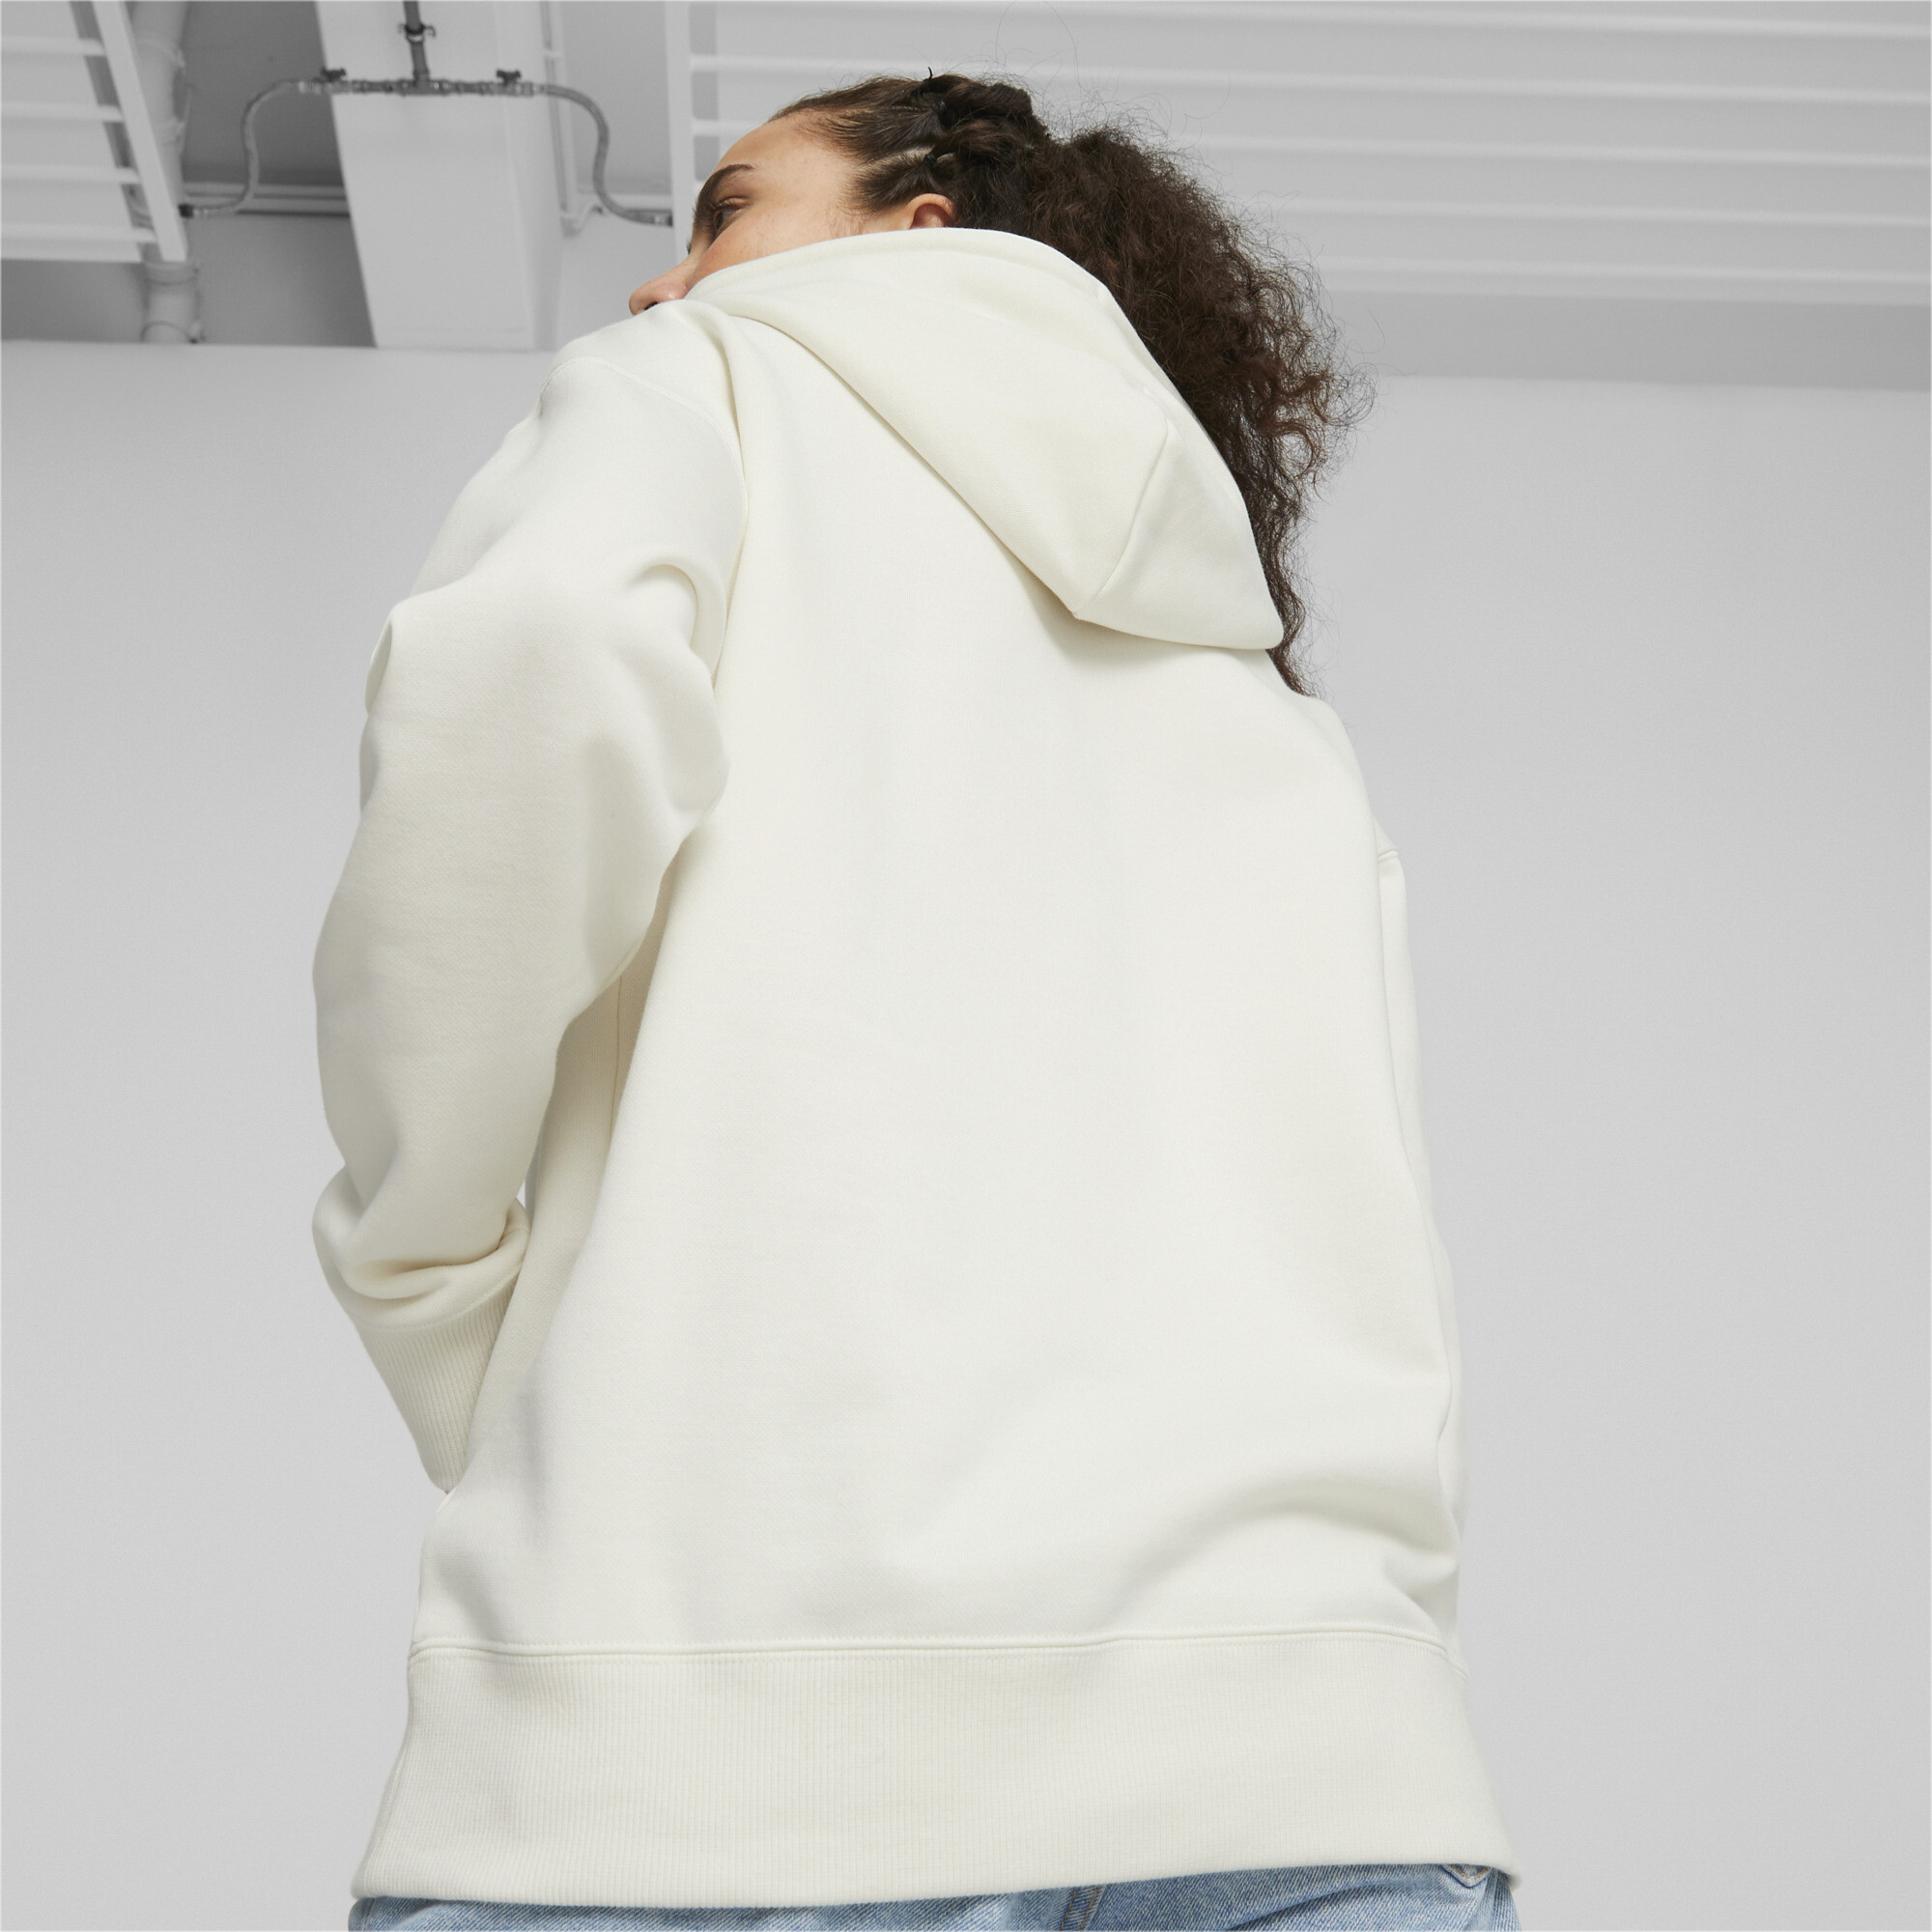 Women's PUMA Team Hoodie In White, Size Small